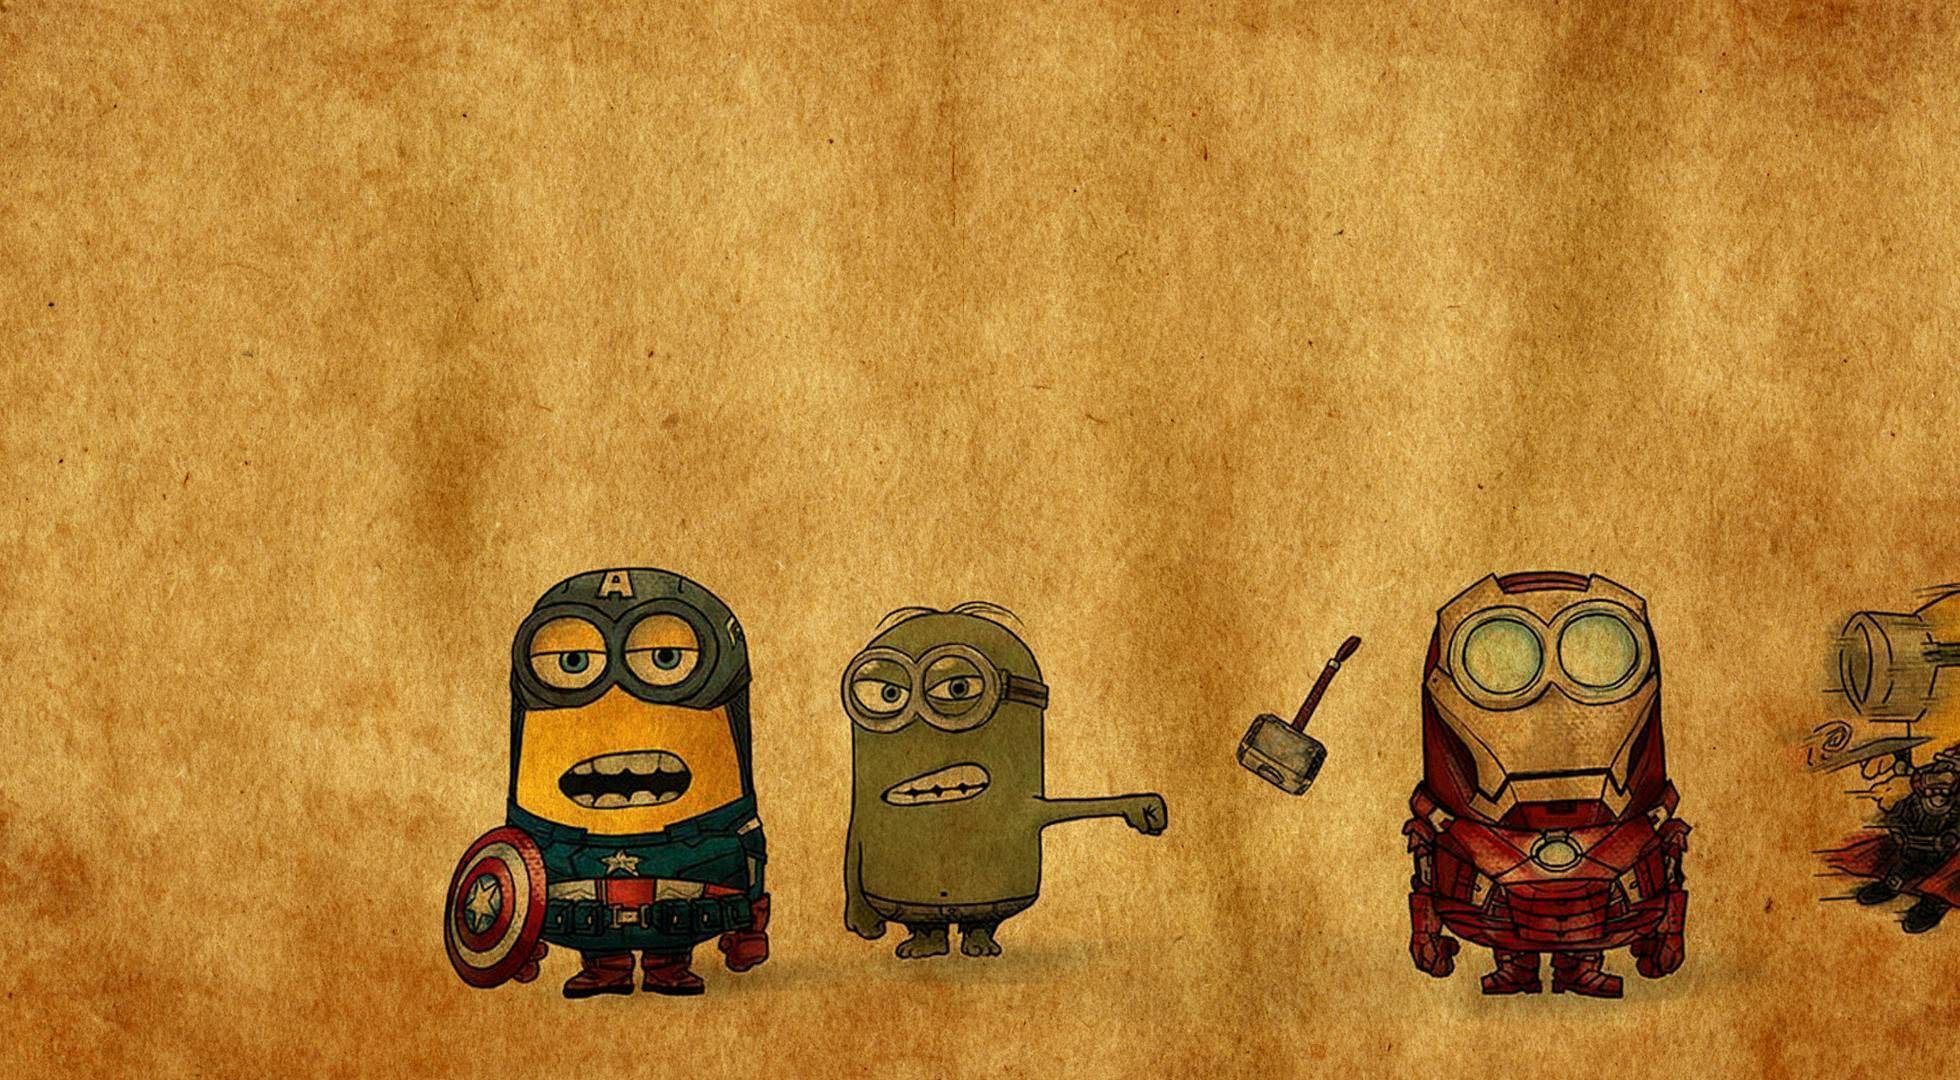 minions-superheroes-hd-wallpapers | wallpapers55.com - Best ...